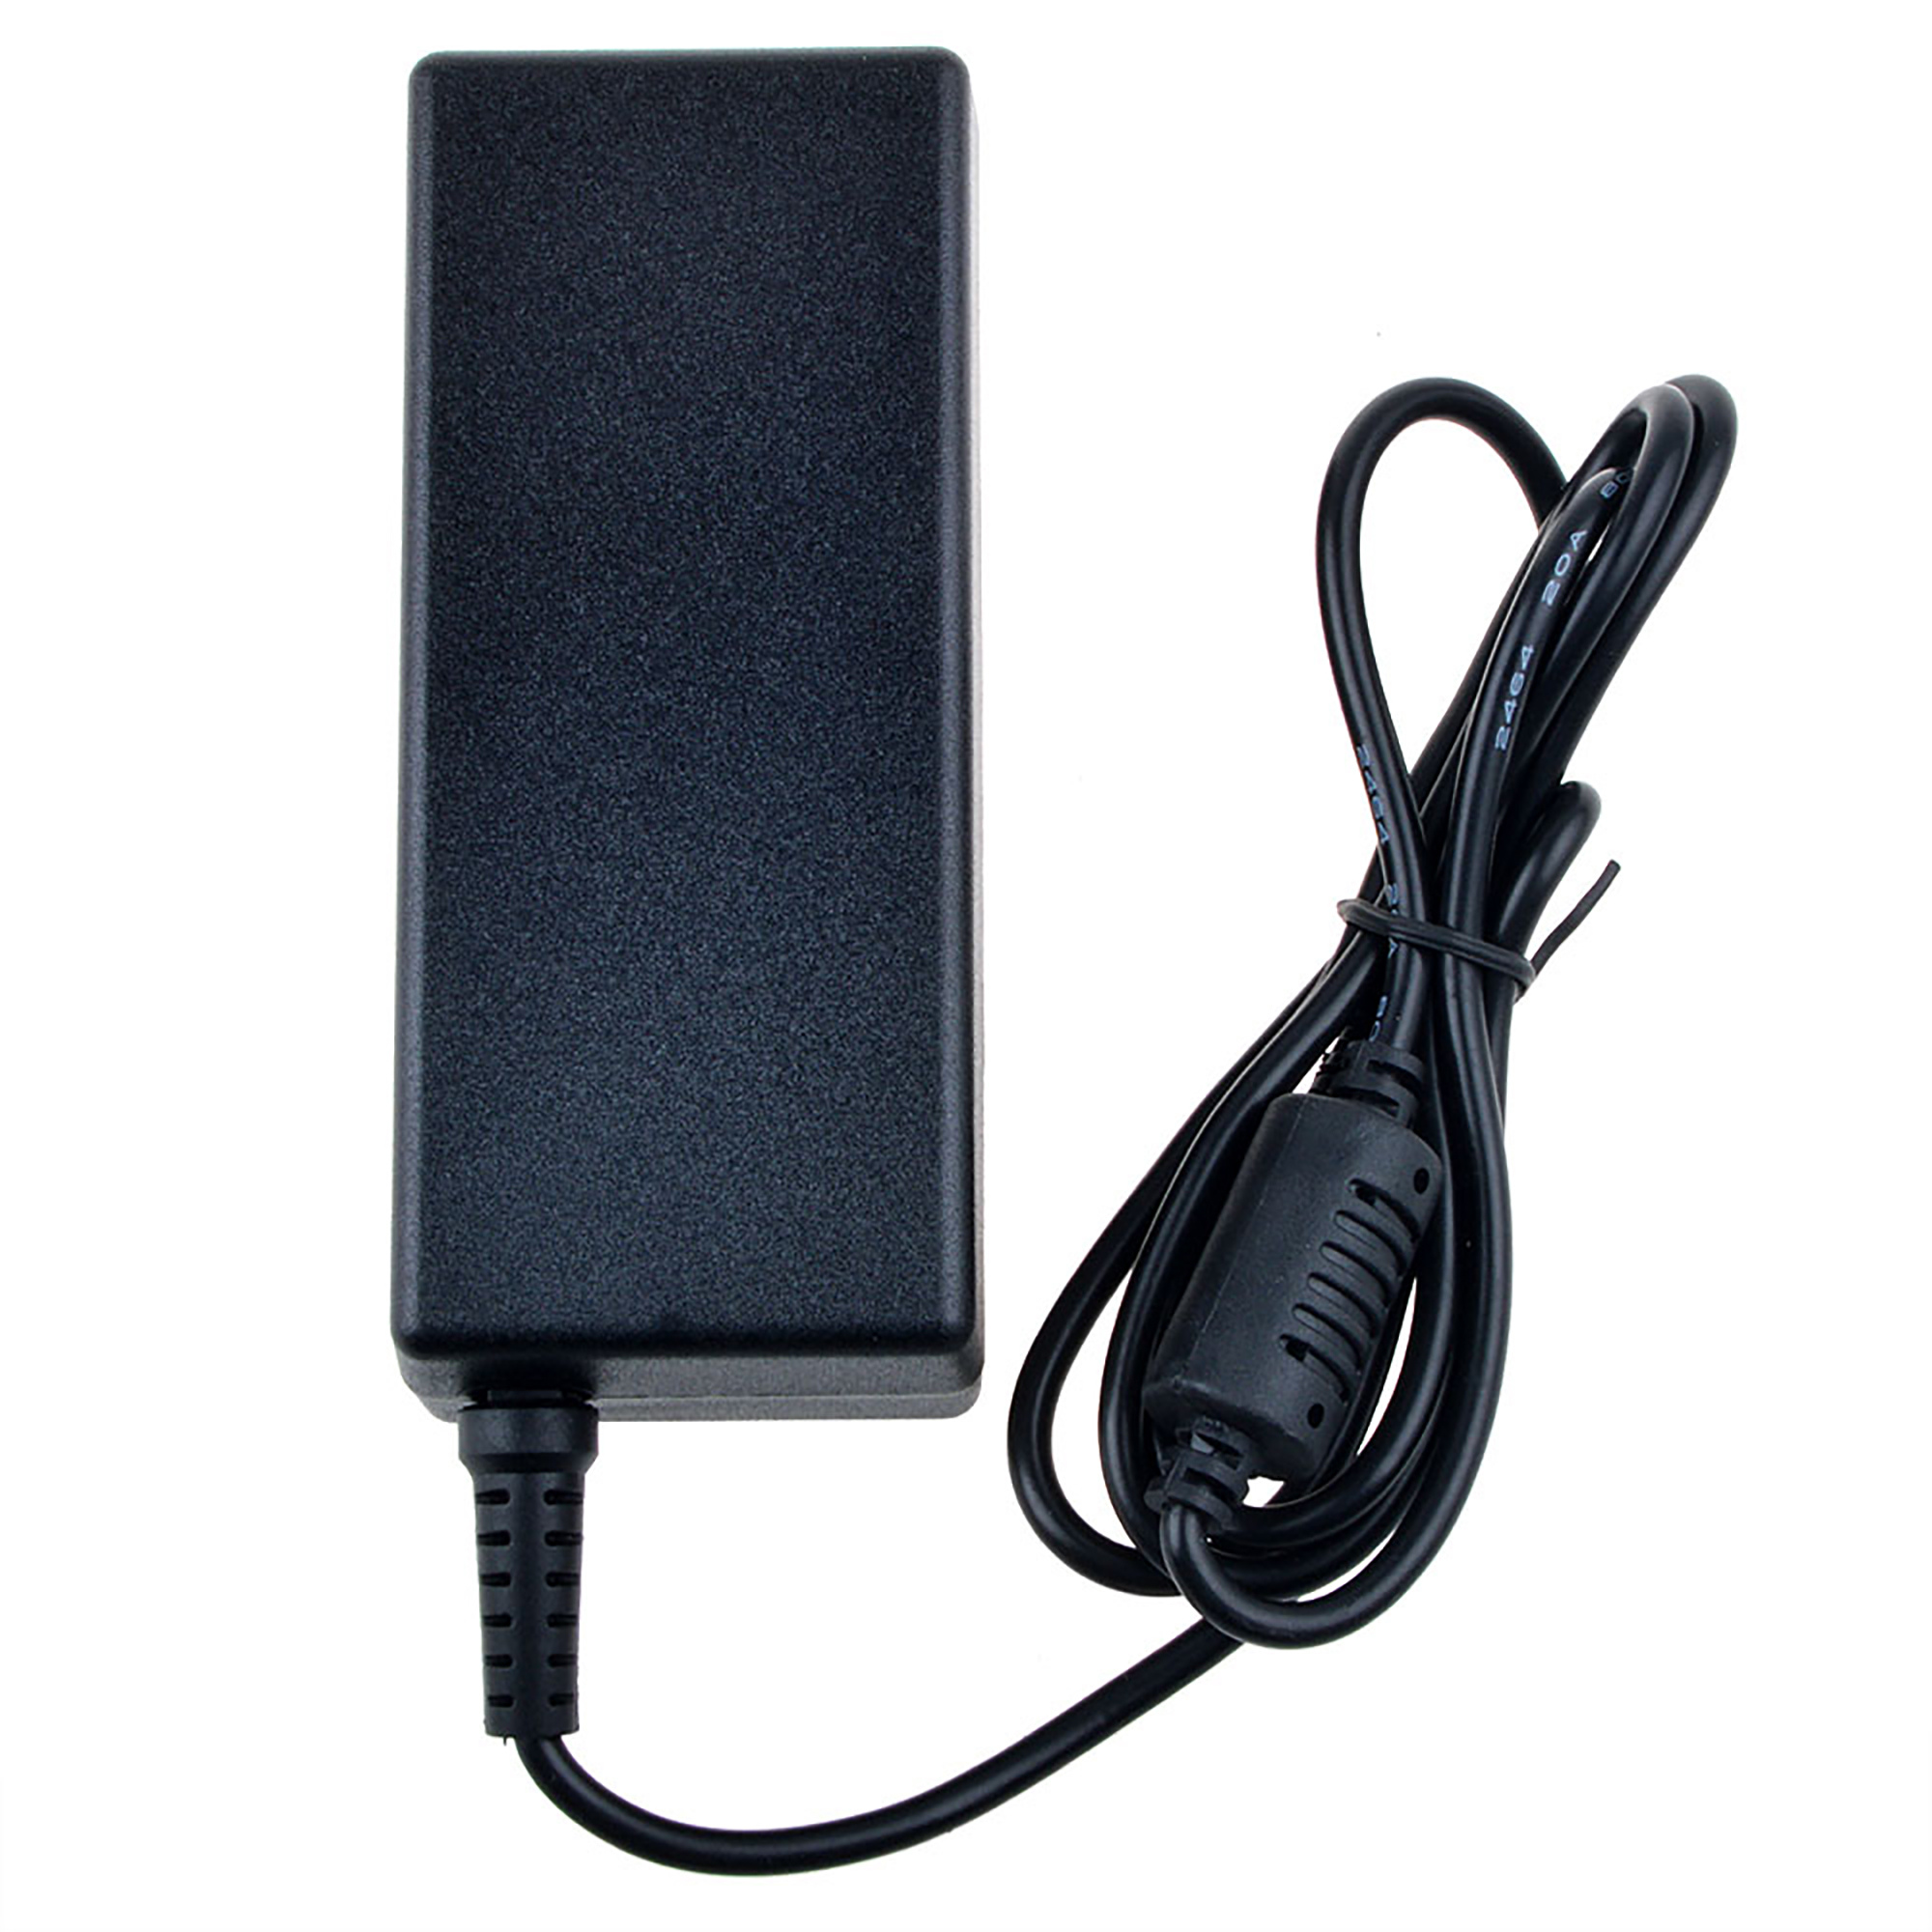 PKPOWER 16V 2.5A AC DC Adapter for ScanSnap SV600 FI-SV600 FI-SV600A FI-SV600A-P PA03641-B305 fi-7030 PA03750-B005 PA03750-B001 N7100 PA03706-B205 Scanner, FMC-AC313S Power Supply - image 5 of 5